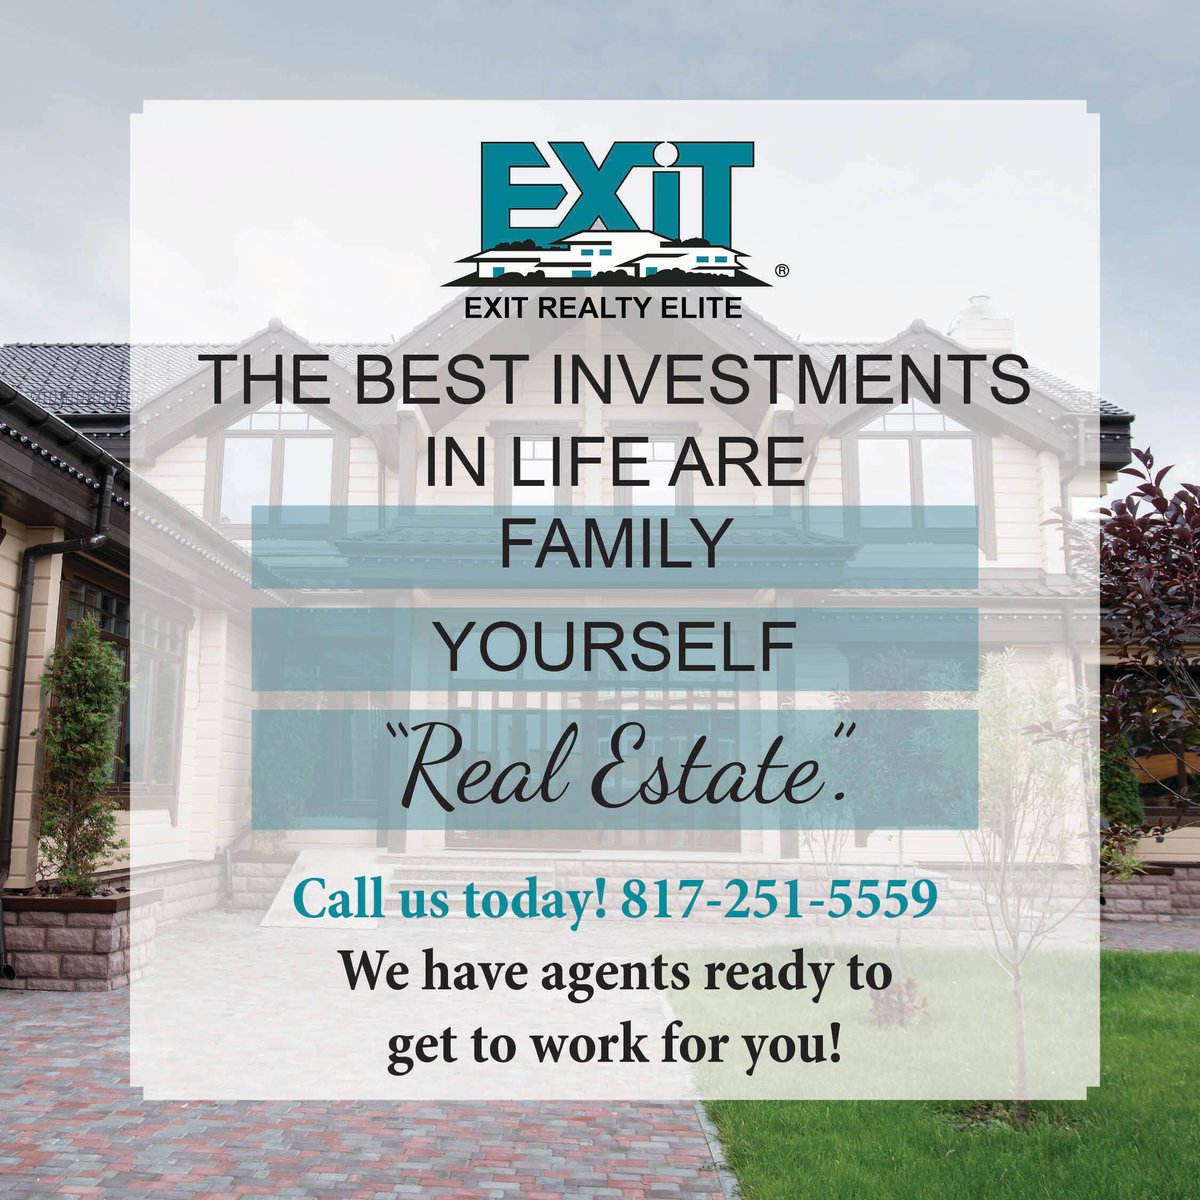 Take care of your investments - we can help!

#LOVEXIT #ImSold #ThinkSmartThinkEXIT #RealEstateReinvented #ListwithEXIT #DFWMetroplex #buyahome #sellahome #EXITRealtyElite #RealEstateCareers #TexasRealEstate